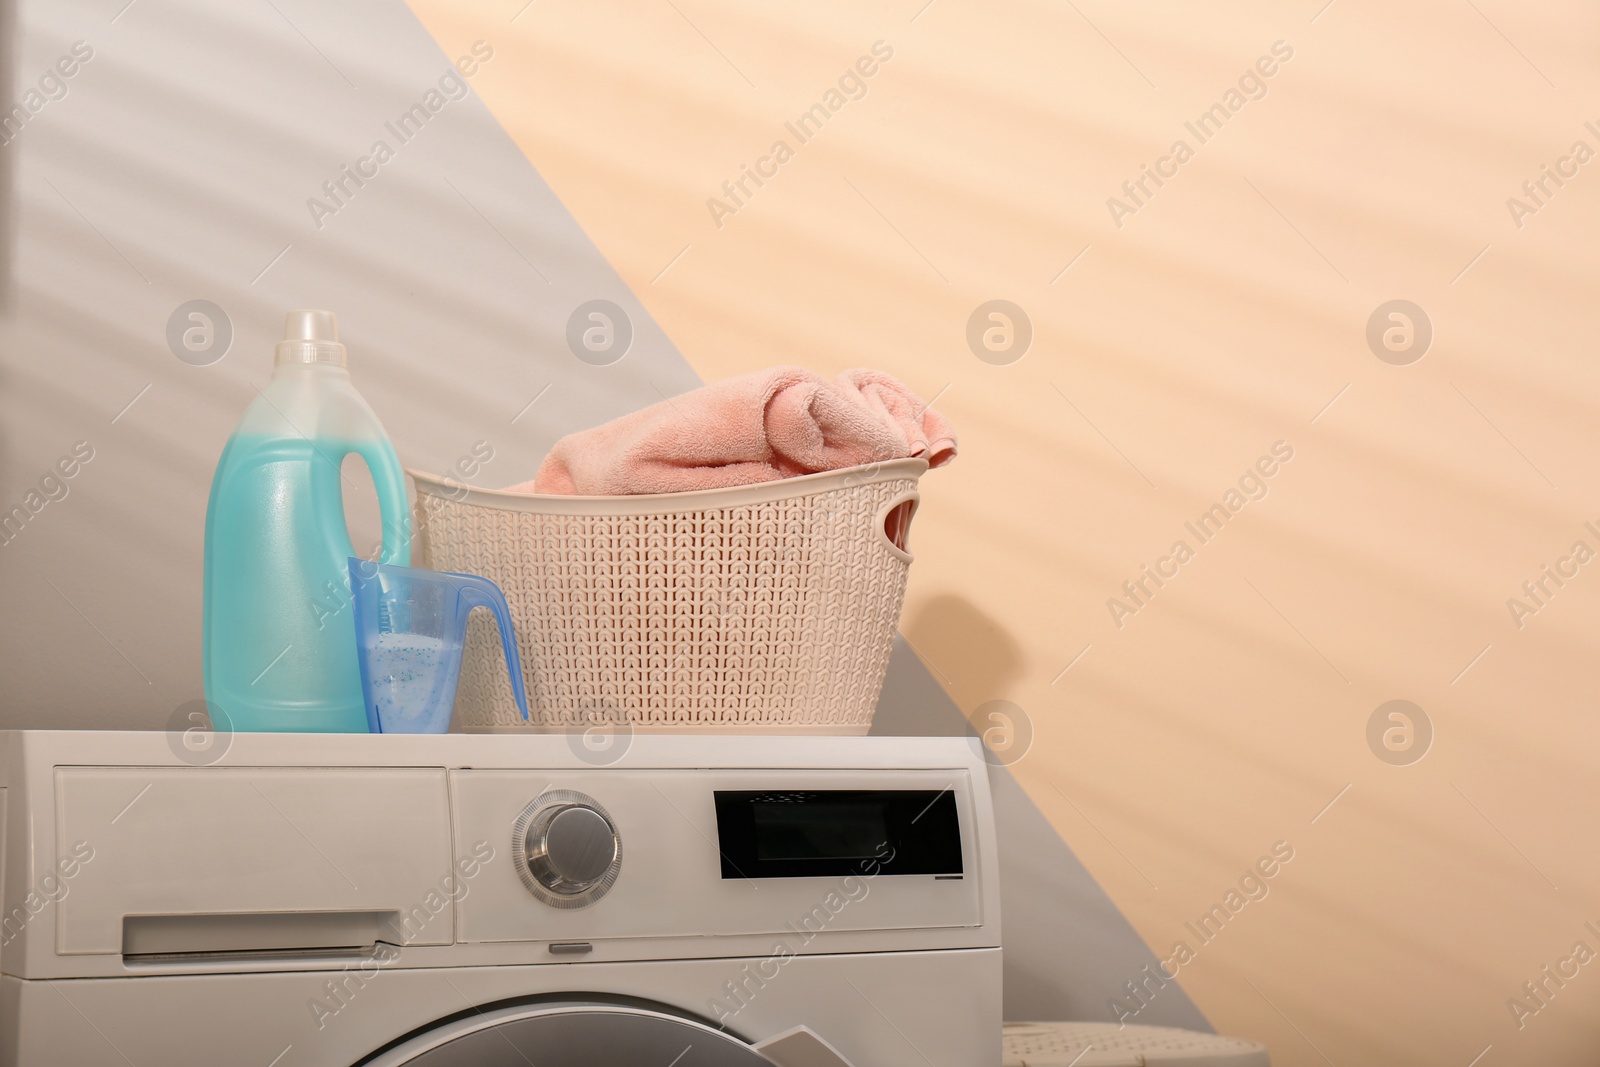 Photo of Detergents and laundry basket on washing machine indoors. Space for text